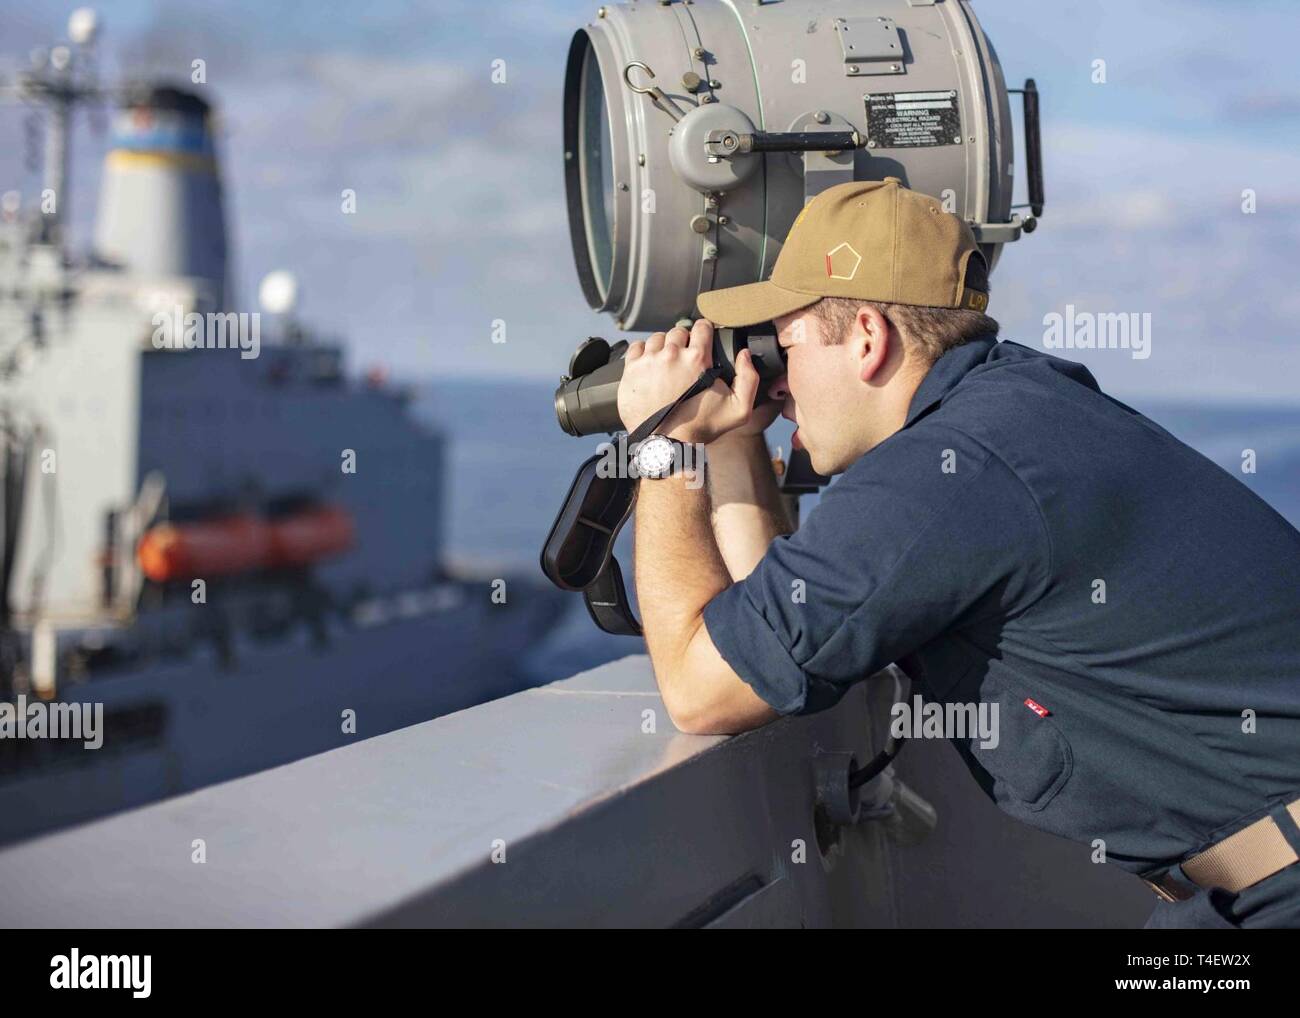 MEDITERRANEAN SEA (April 3, 2019) - Ensign Michael Boehm uses a laser range finder aboard the San Antonio-class amphibious transport dock ship USS Arlington (LPD 24) during a replenishment-at-sea with the Henry Kaiser-class fleet replenishment oiler USNS John Lenthall (T-AO 189), April 3, 2019. Arlington is on a scheduled deployment as part of the Kearsarge Amphibious Ready Group in support of maritime security operations, crisis response and theater security cooperation, while also providing a forward naval presence. Stock Photo